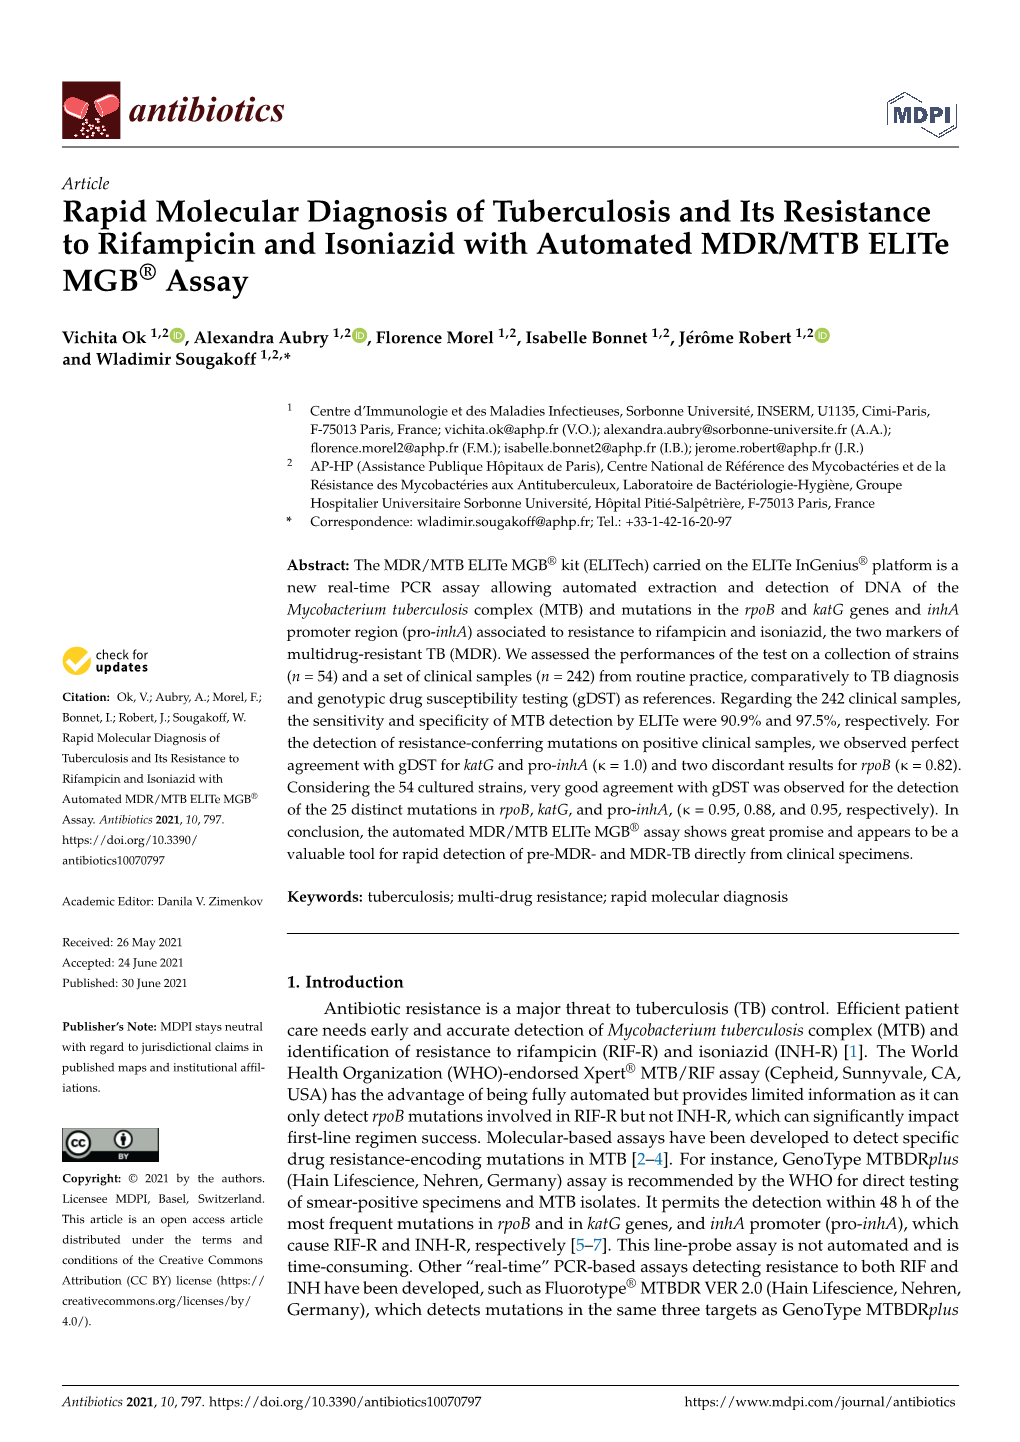 Rapid Molecular Diagnosis of Tuberculosis and Its Resistance to Rifampicin and Isoniazid with Automated MDR/MTB Elite MGB® Assay